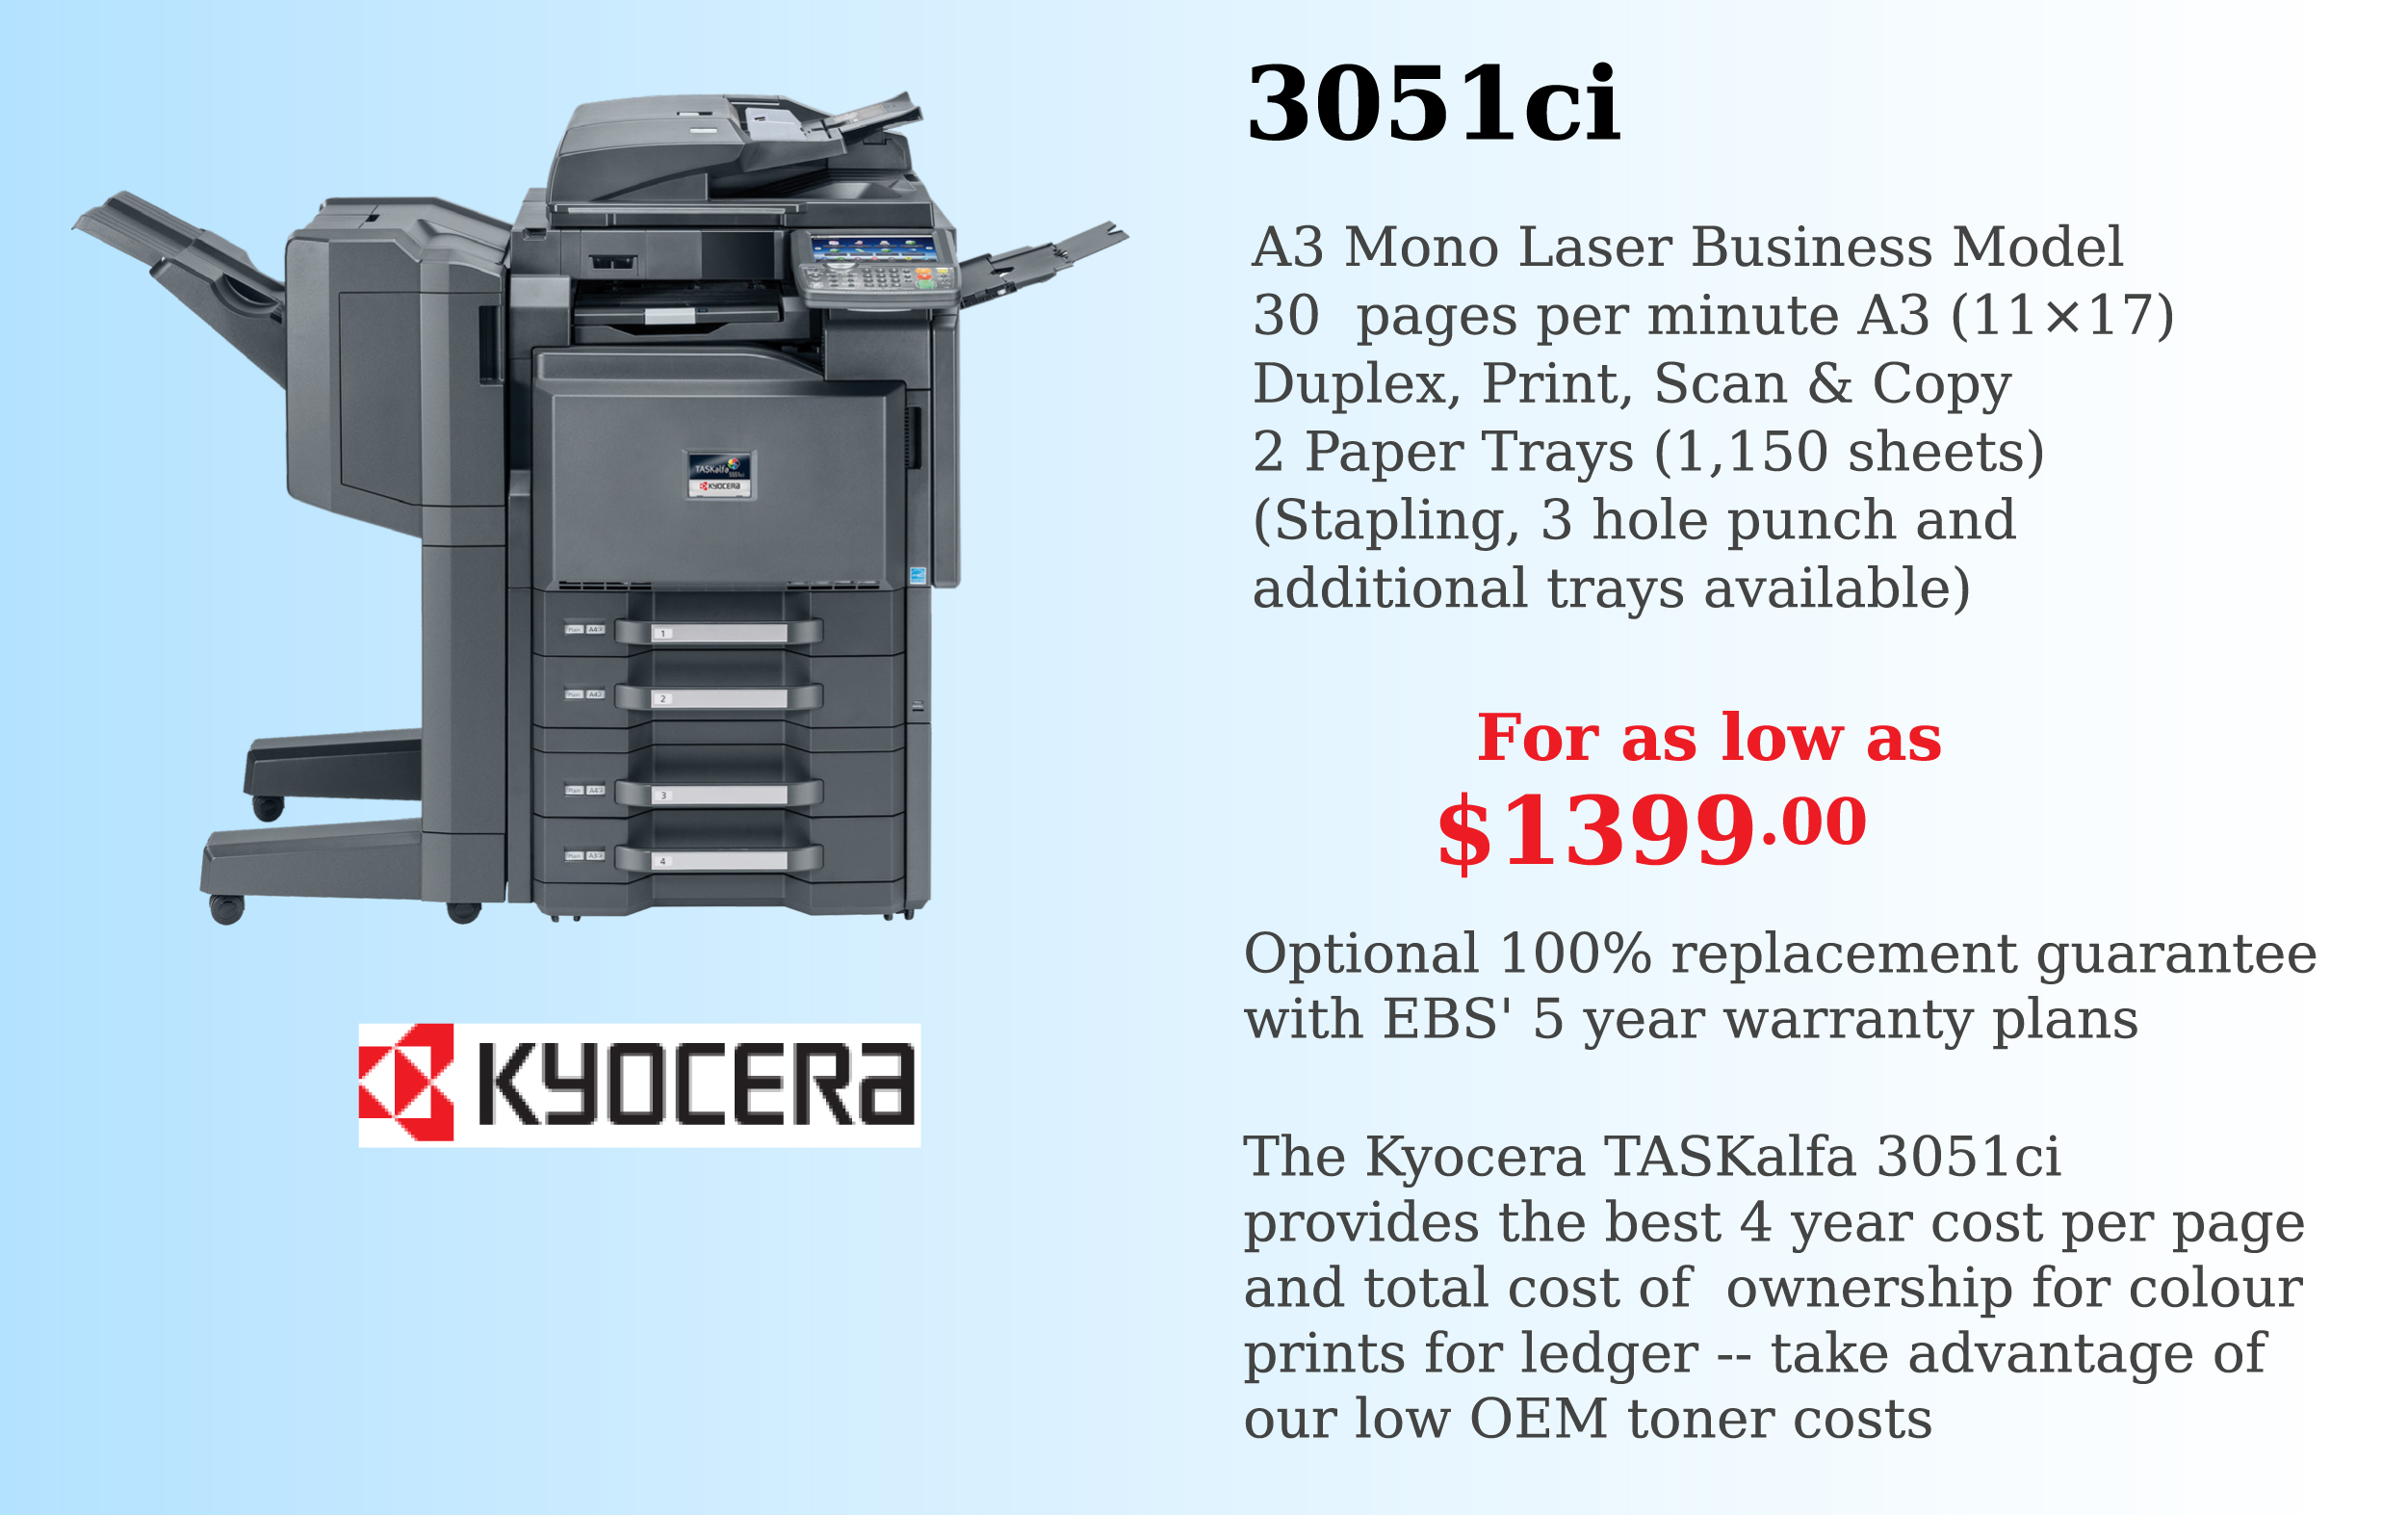 Photocopier and Print Solutions in Vaughan, Ajax, and North York, Scarborough and the GTA